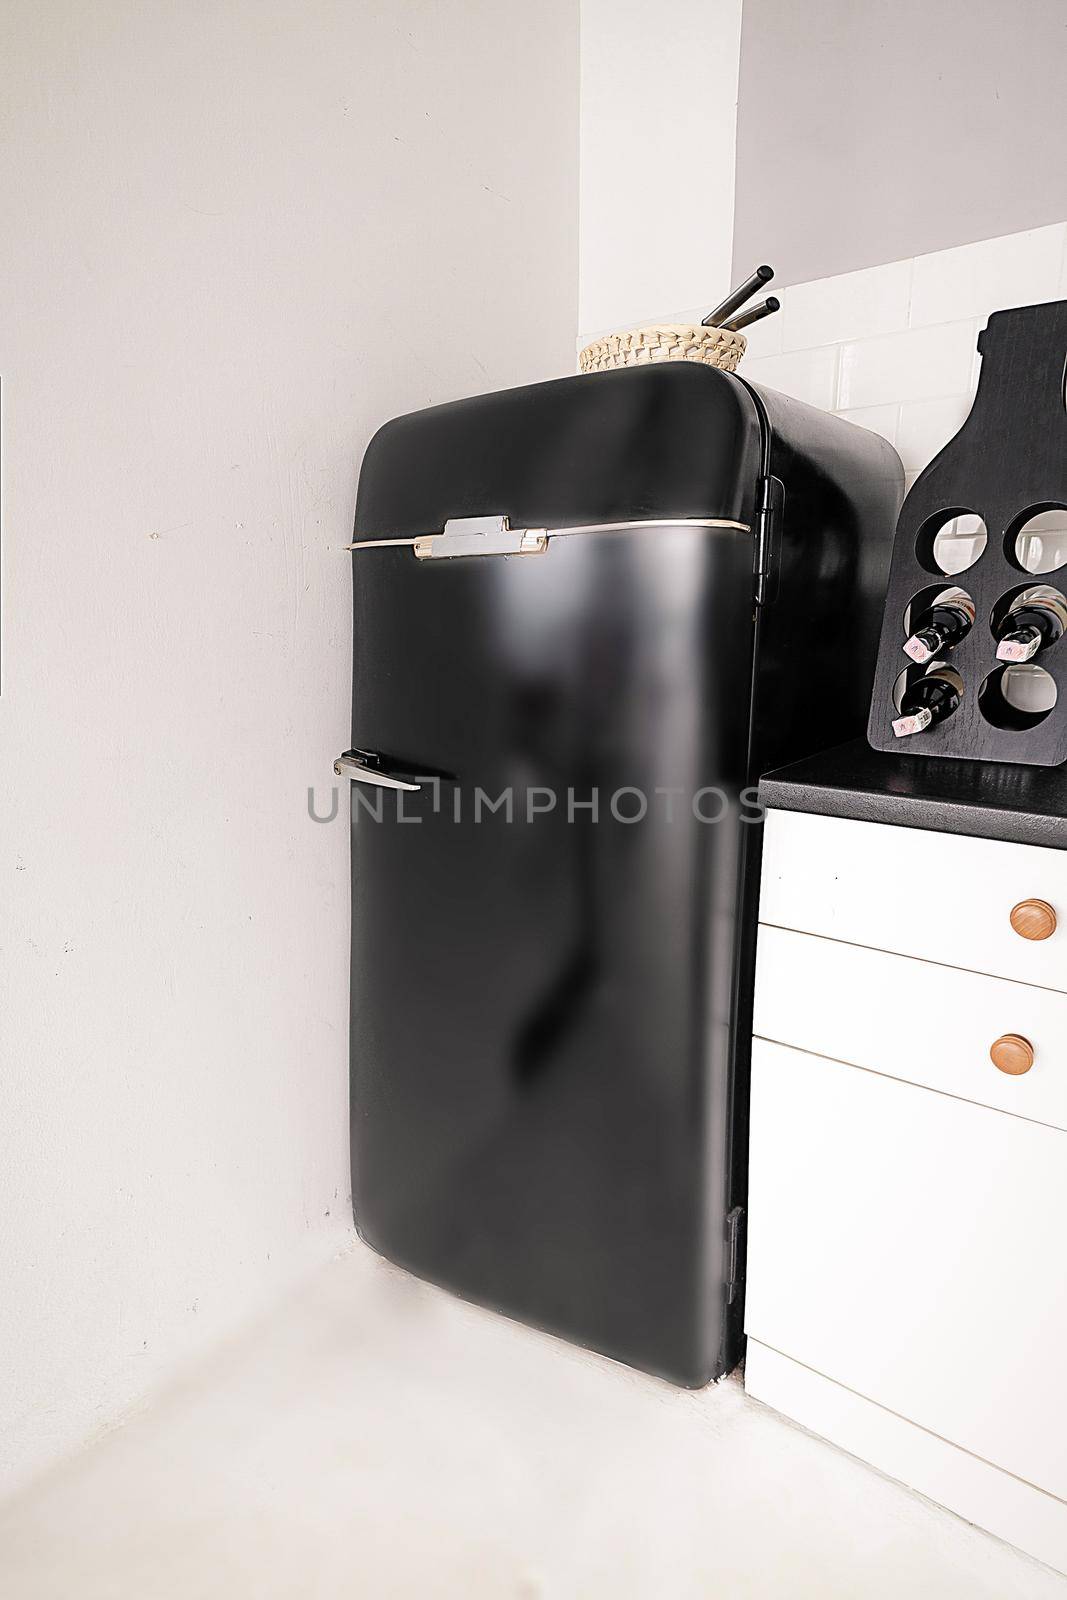 Glossy Stylish Fridge in Retro Style in White Kitchen. Black Refrigerator in Vintage Style on White Background. Close-up. High quality photo